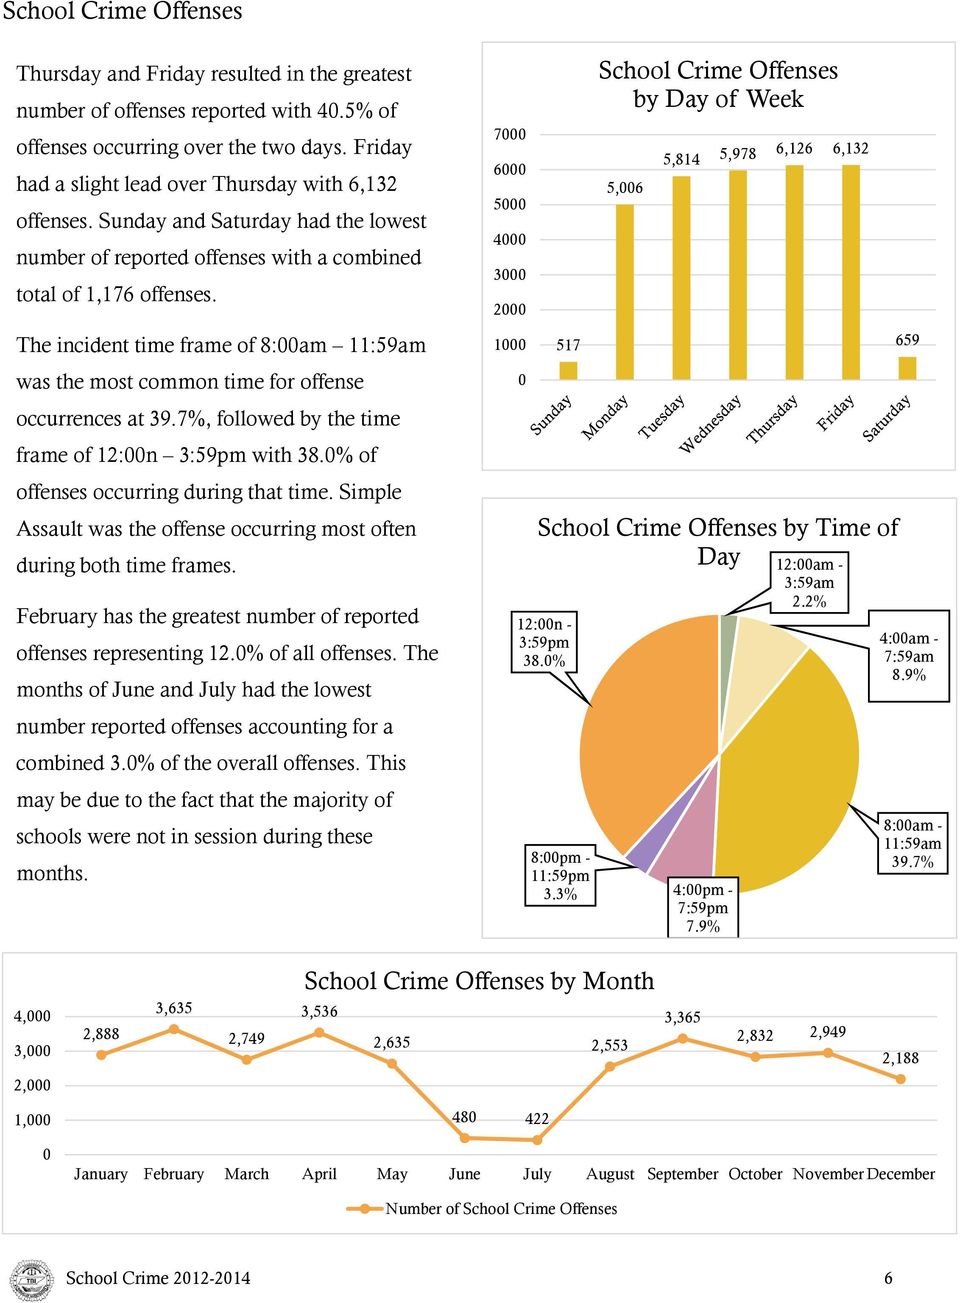 The incident time frame of 8:00am 11:59am was the most common time for offense occurrences at 39.7%, followed by the time frame of 12:00n 3:59pm with 38.0% of offenses occurring during that time.